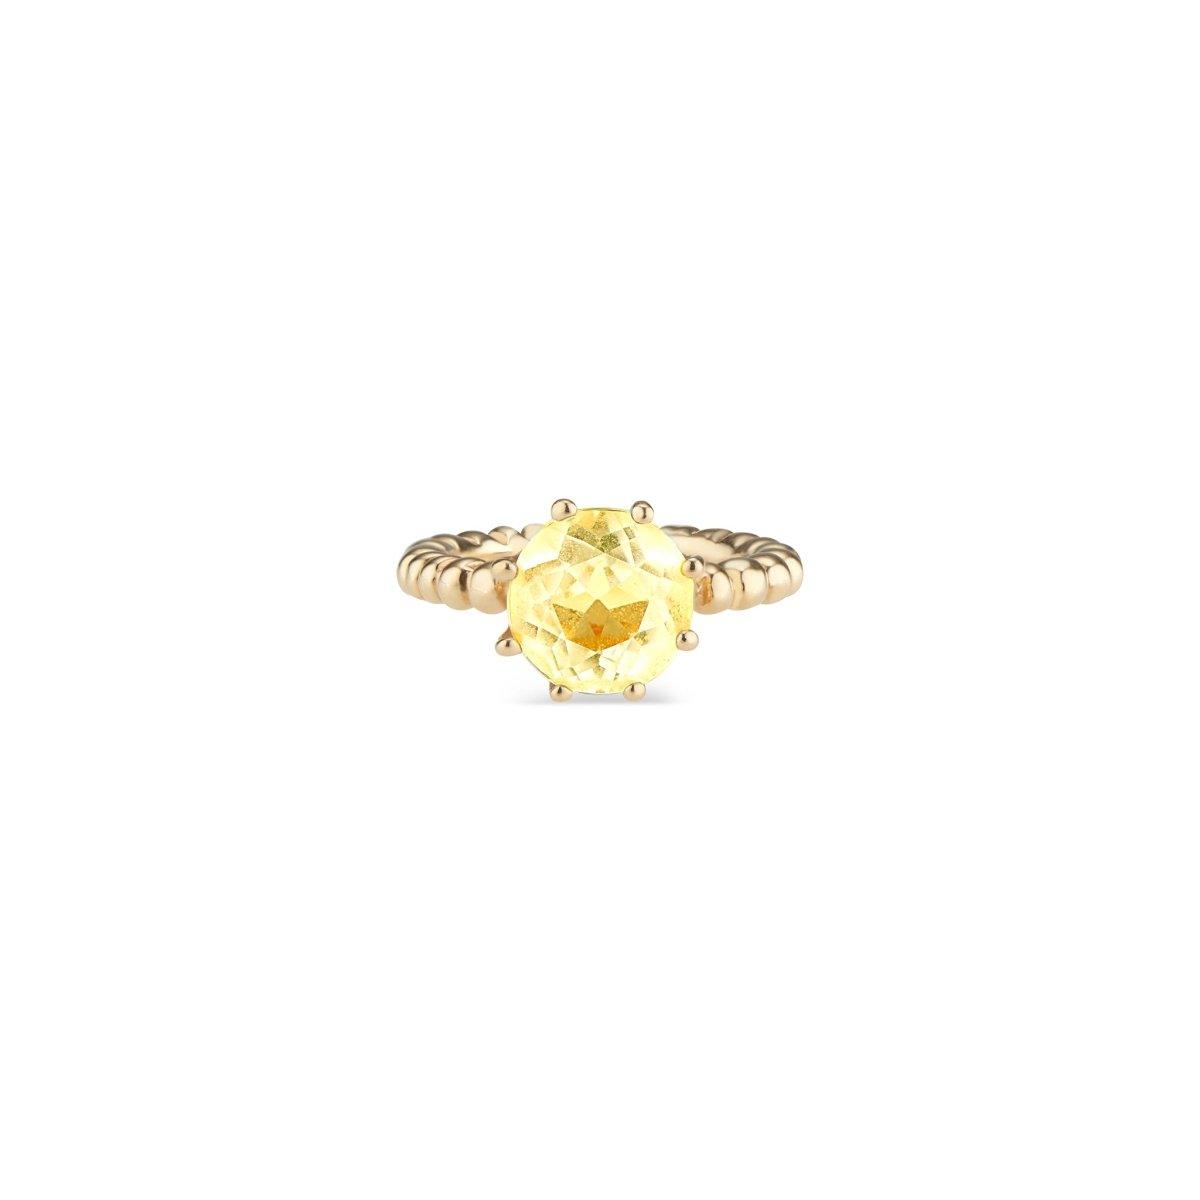 Gold Crown Ring with Yellow Beryl - Nataly Aponte